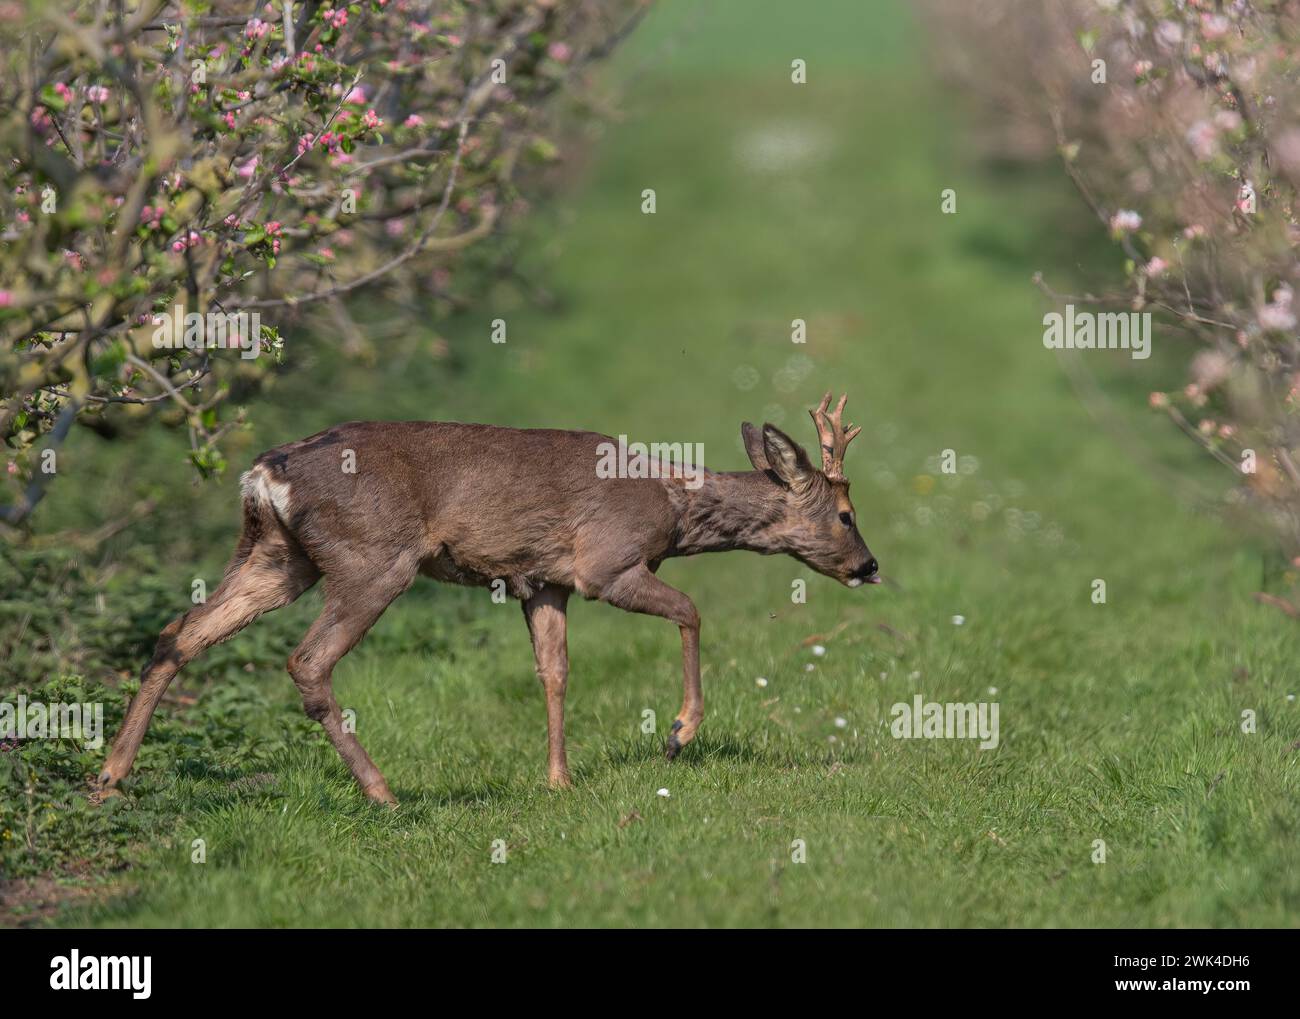 A male Roe Deer with antlers (Capreolus capreolus) walking amongst the pink apple blossom in the Apple orchards of a Suffolk Farm . UK Stock Photo